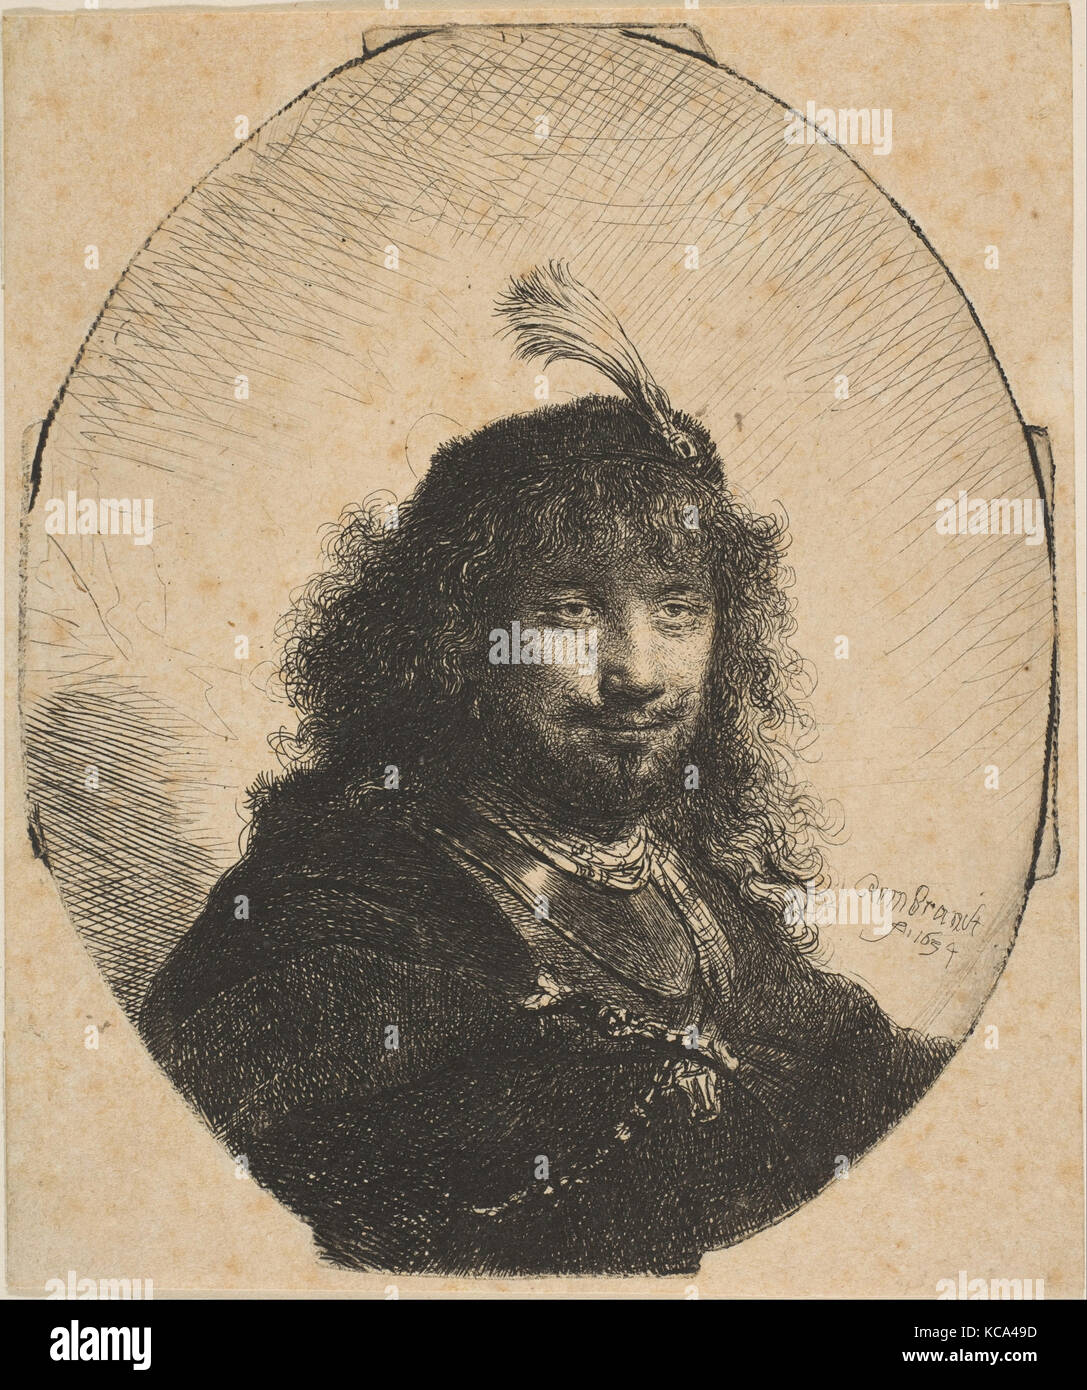 Self-Portrait with Plumed Cap and Lowered Sabre, Rembrandt, 1634 Stock Photo